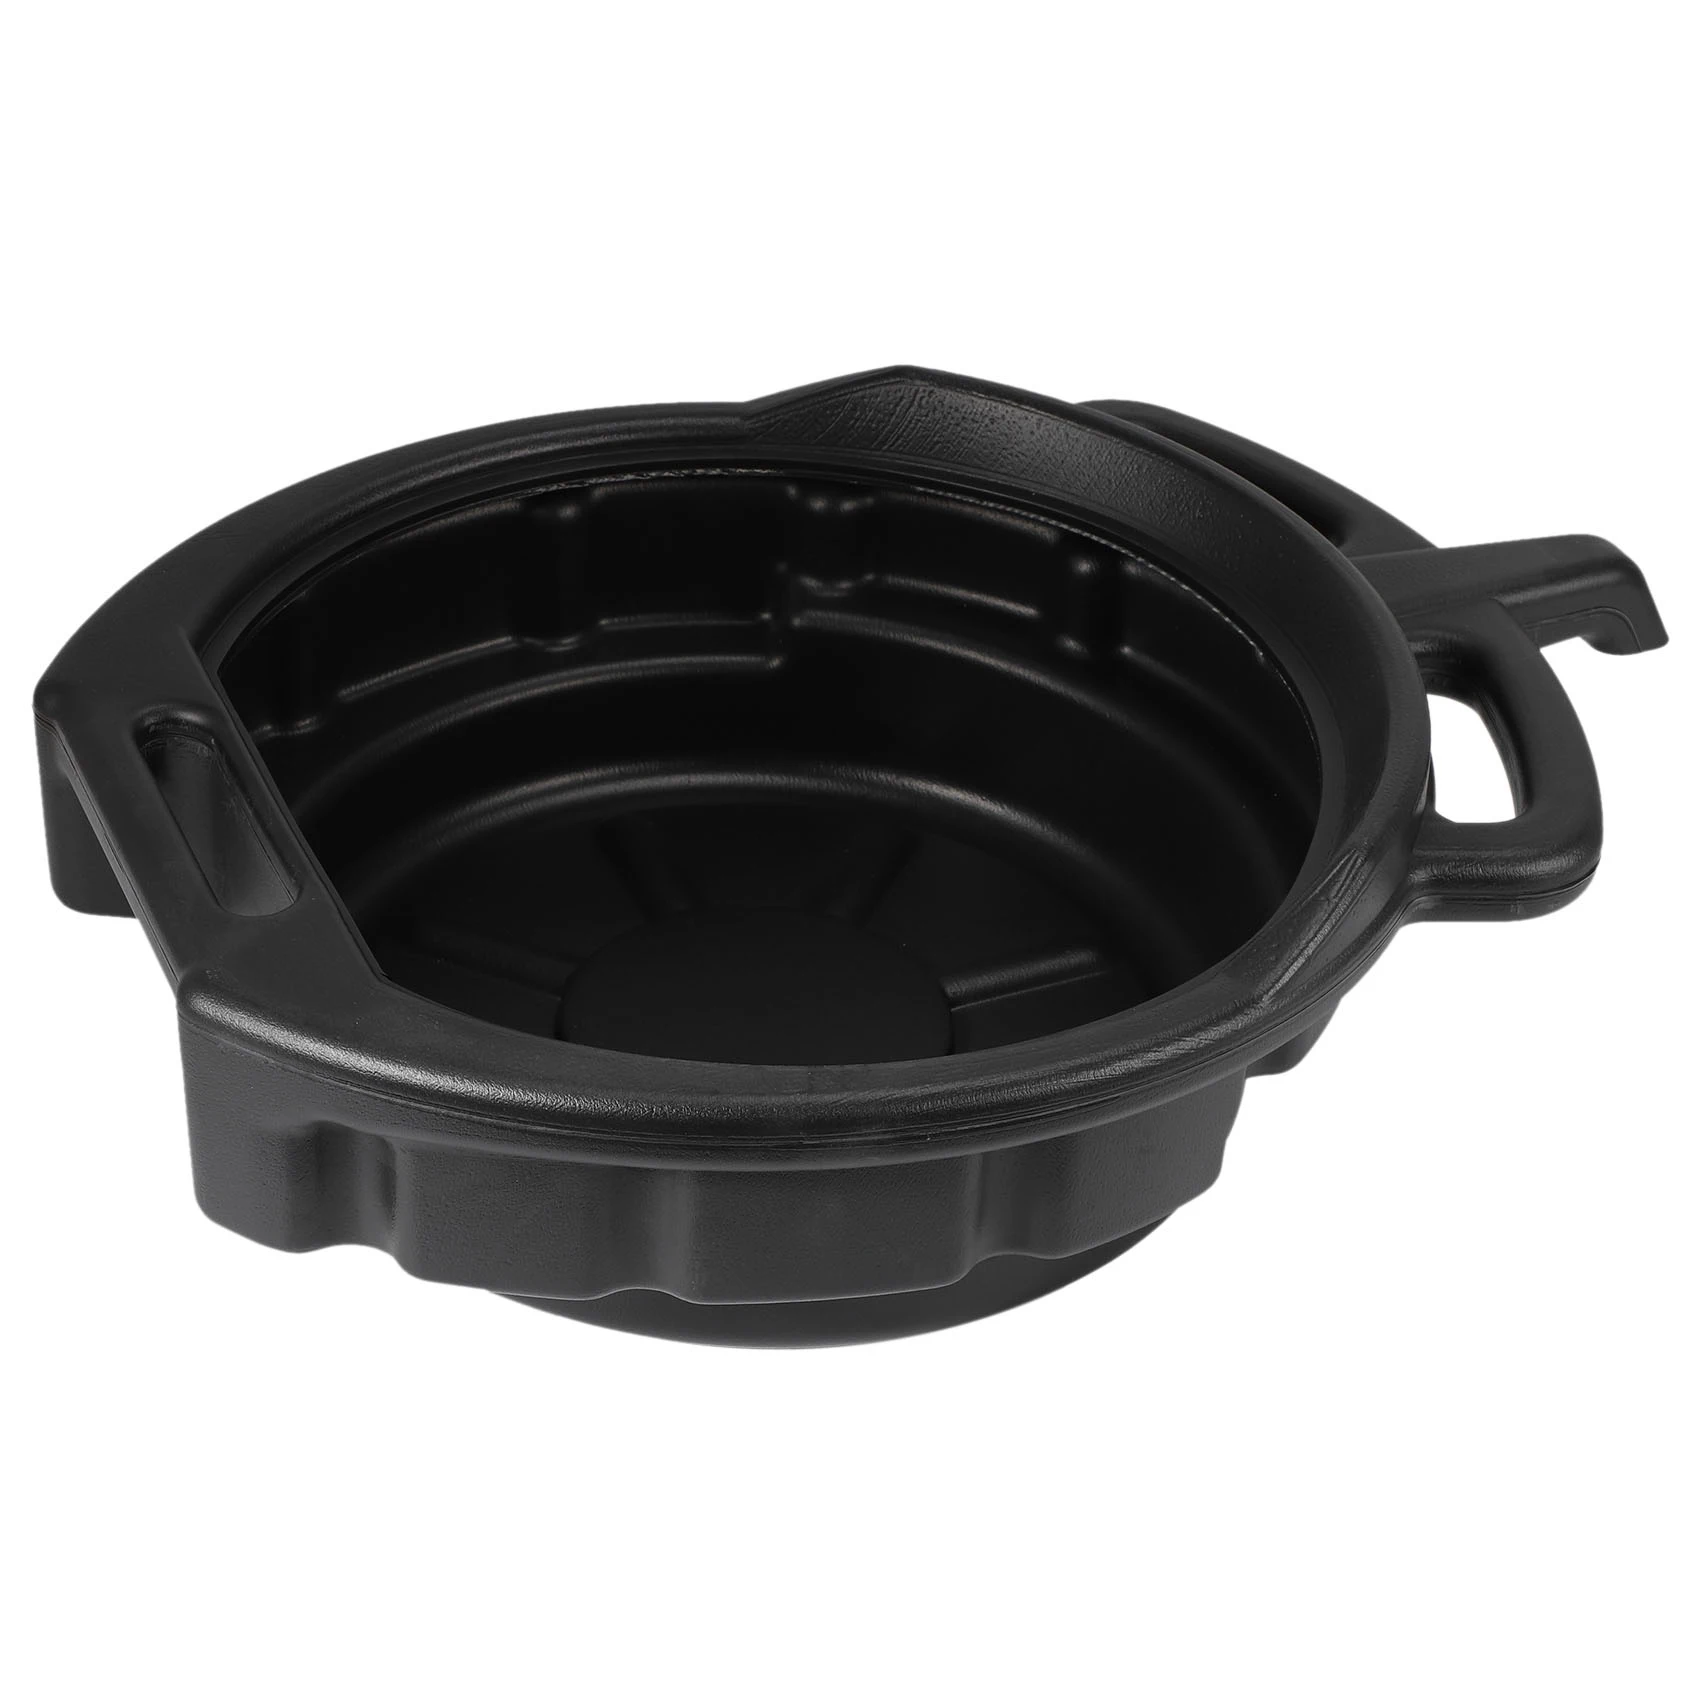 

7.5L Plastic Oil Drain Pan Wast Engine Oil Collector Tank Gearbox Oil Trip Tray For Repair Car Fuel Fluid Change Garage Tool